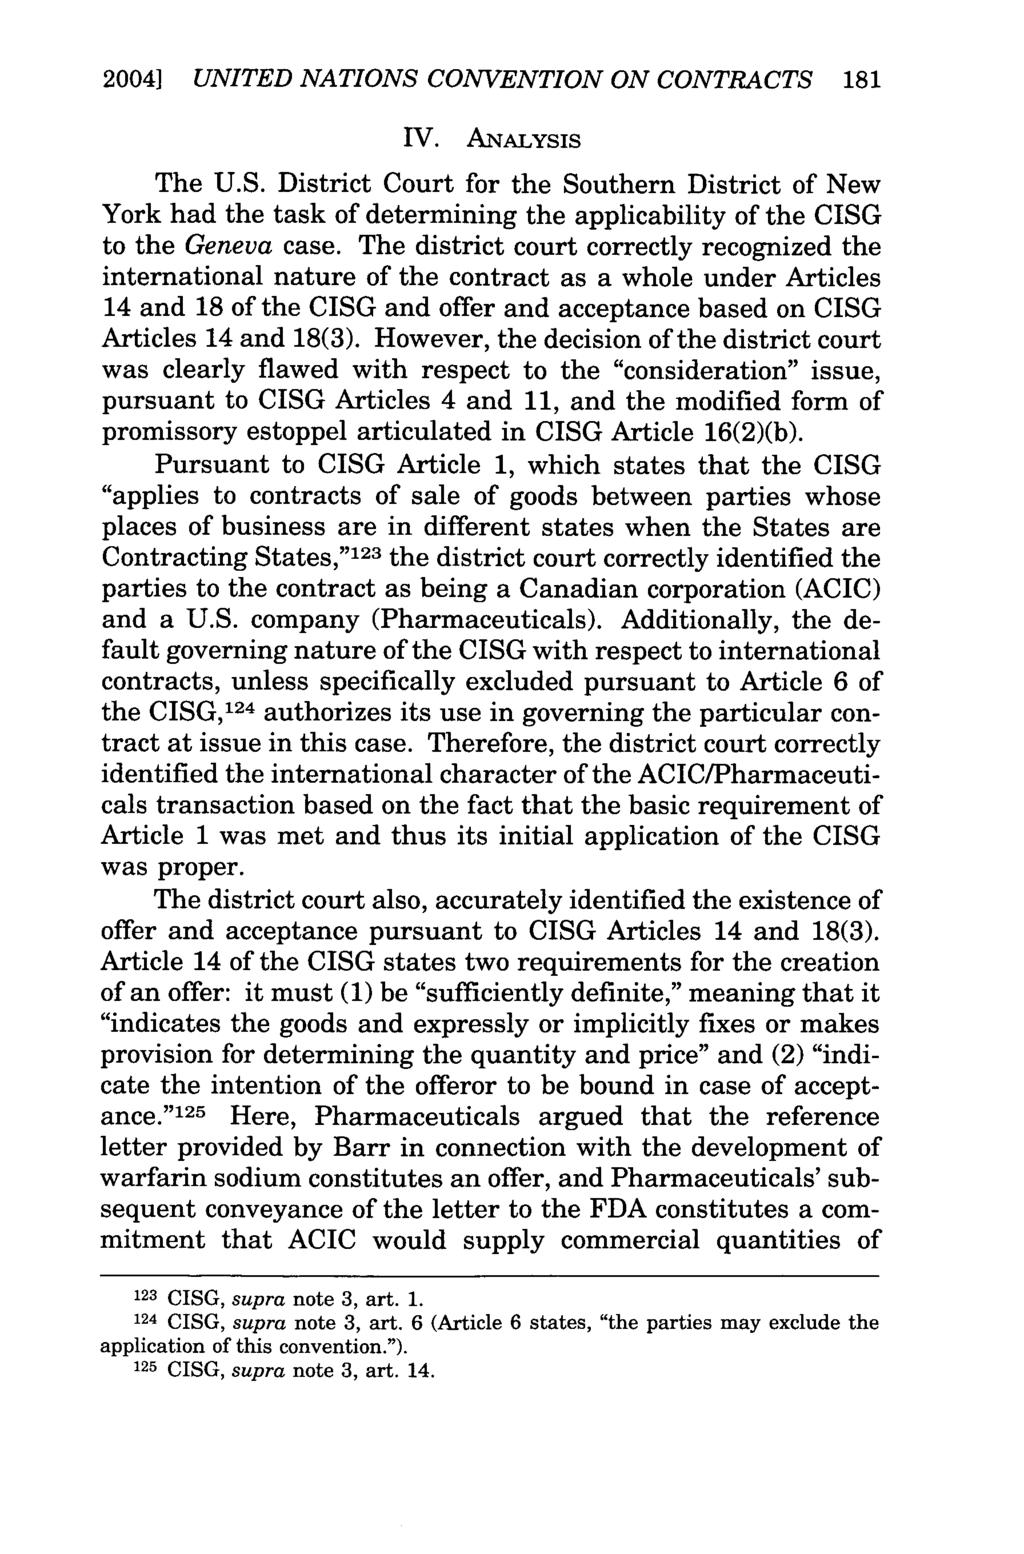 2004] UNITED NATIONS CONVENTION ON CONTRACTS 181 IV. ANALYSIS The U.S. District Court for the Southern District of New York had the task of determining the applicability of the CISG to the Geneva case.